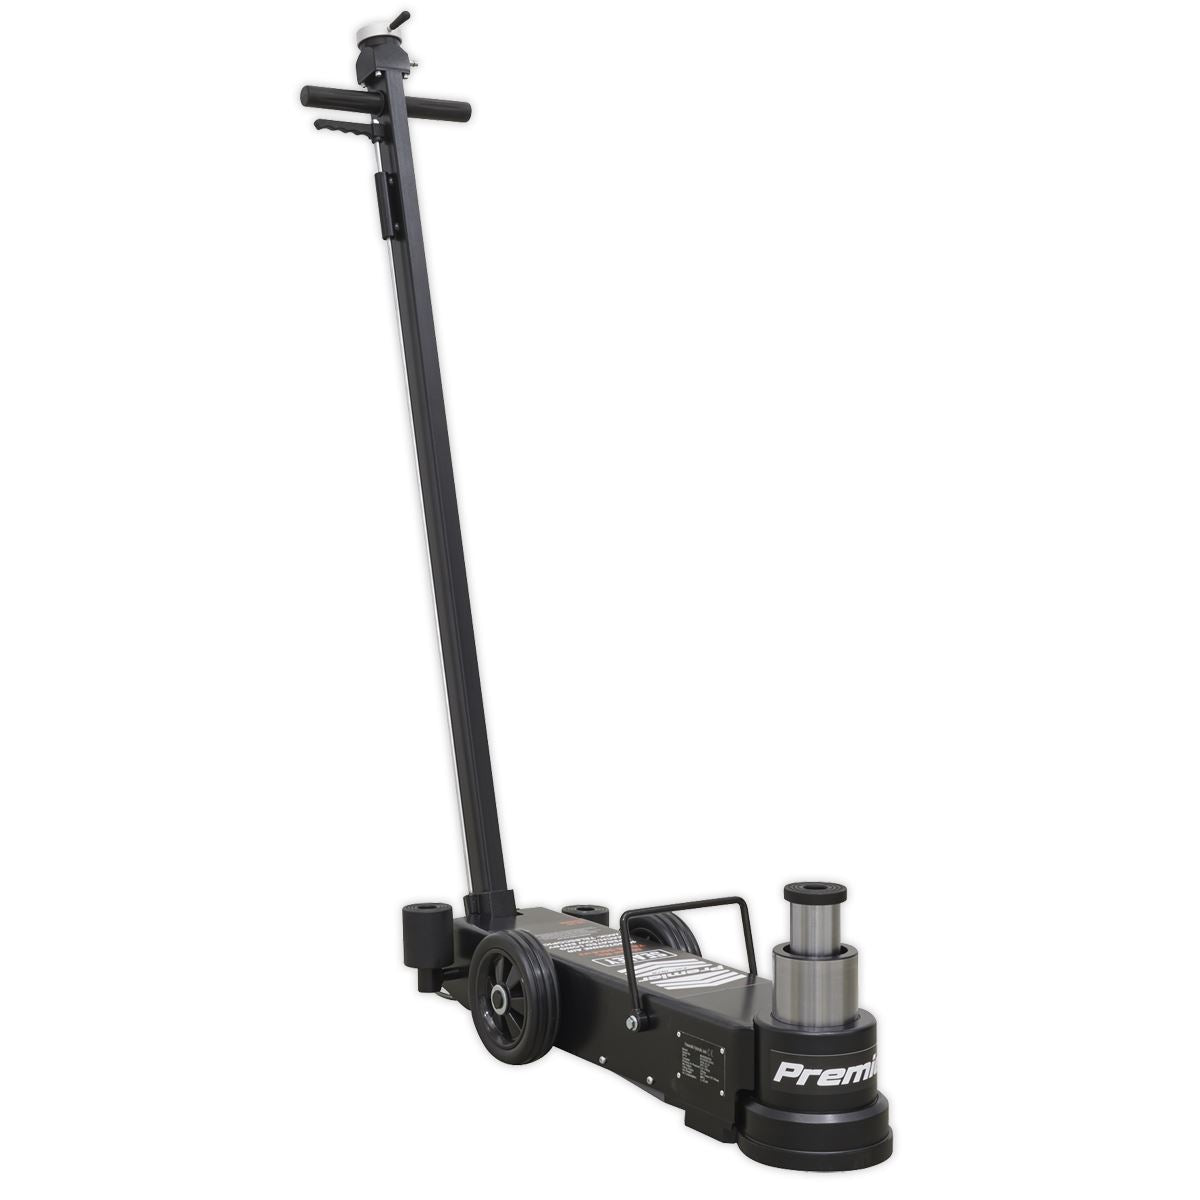 Sealey Long Reach/Low Profile Air Operated Telescopic Jack 15-30 Tonne